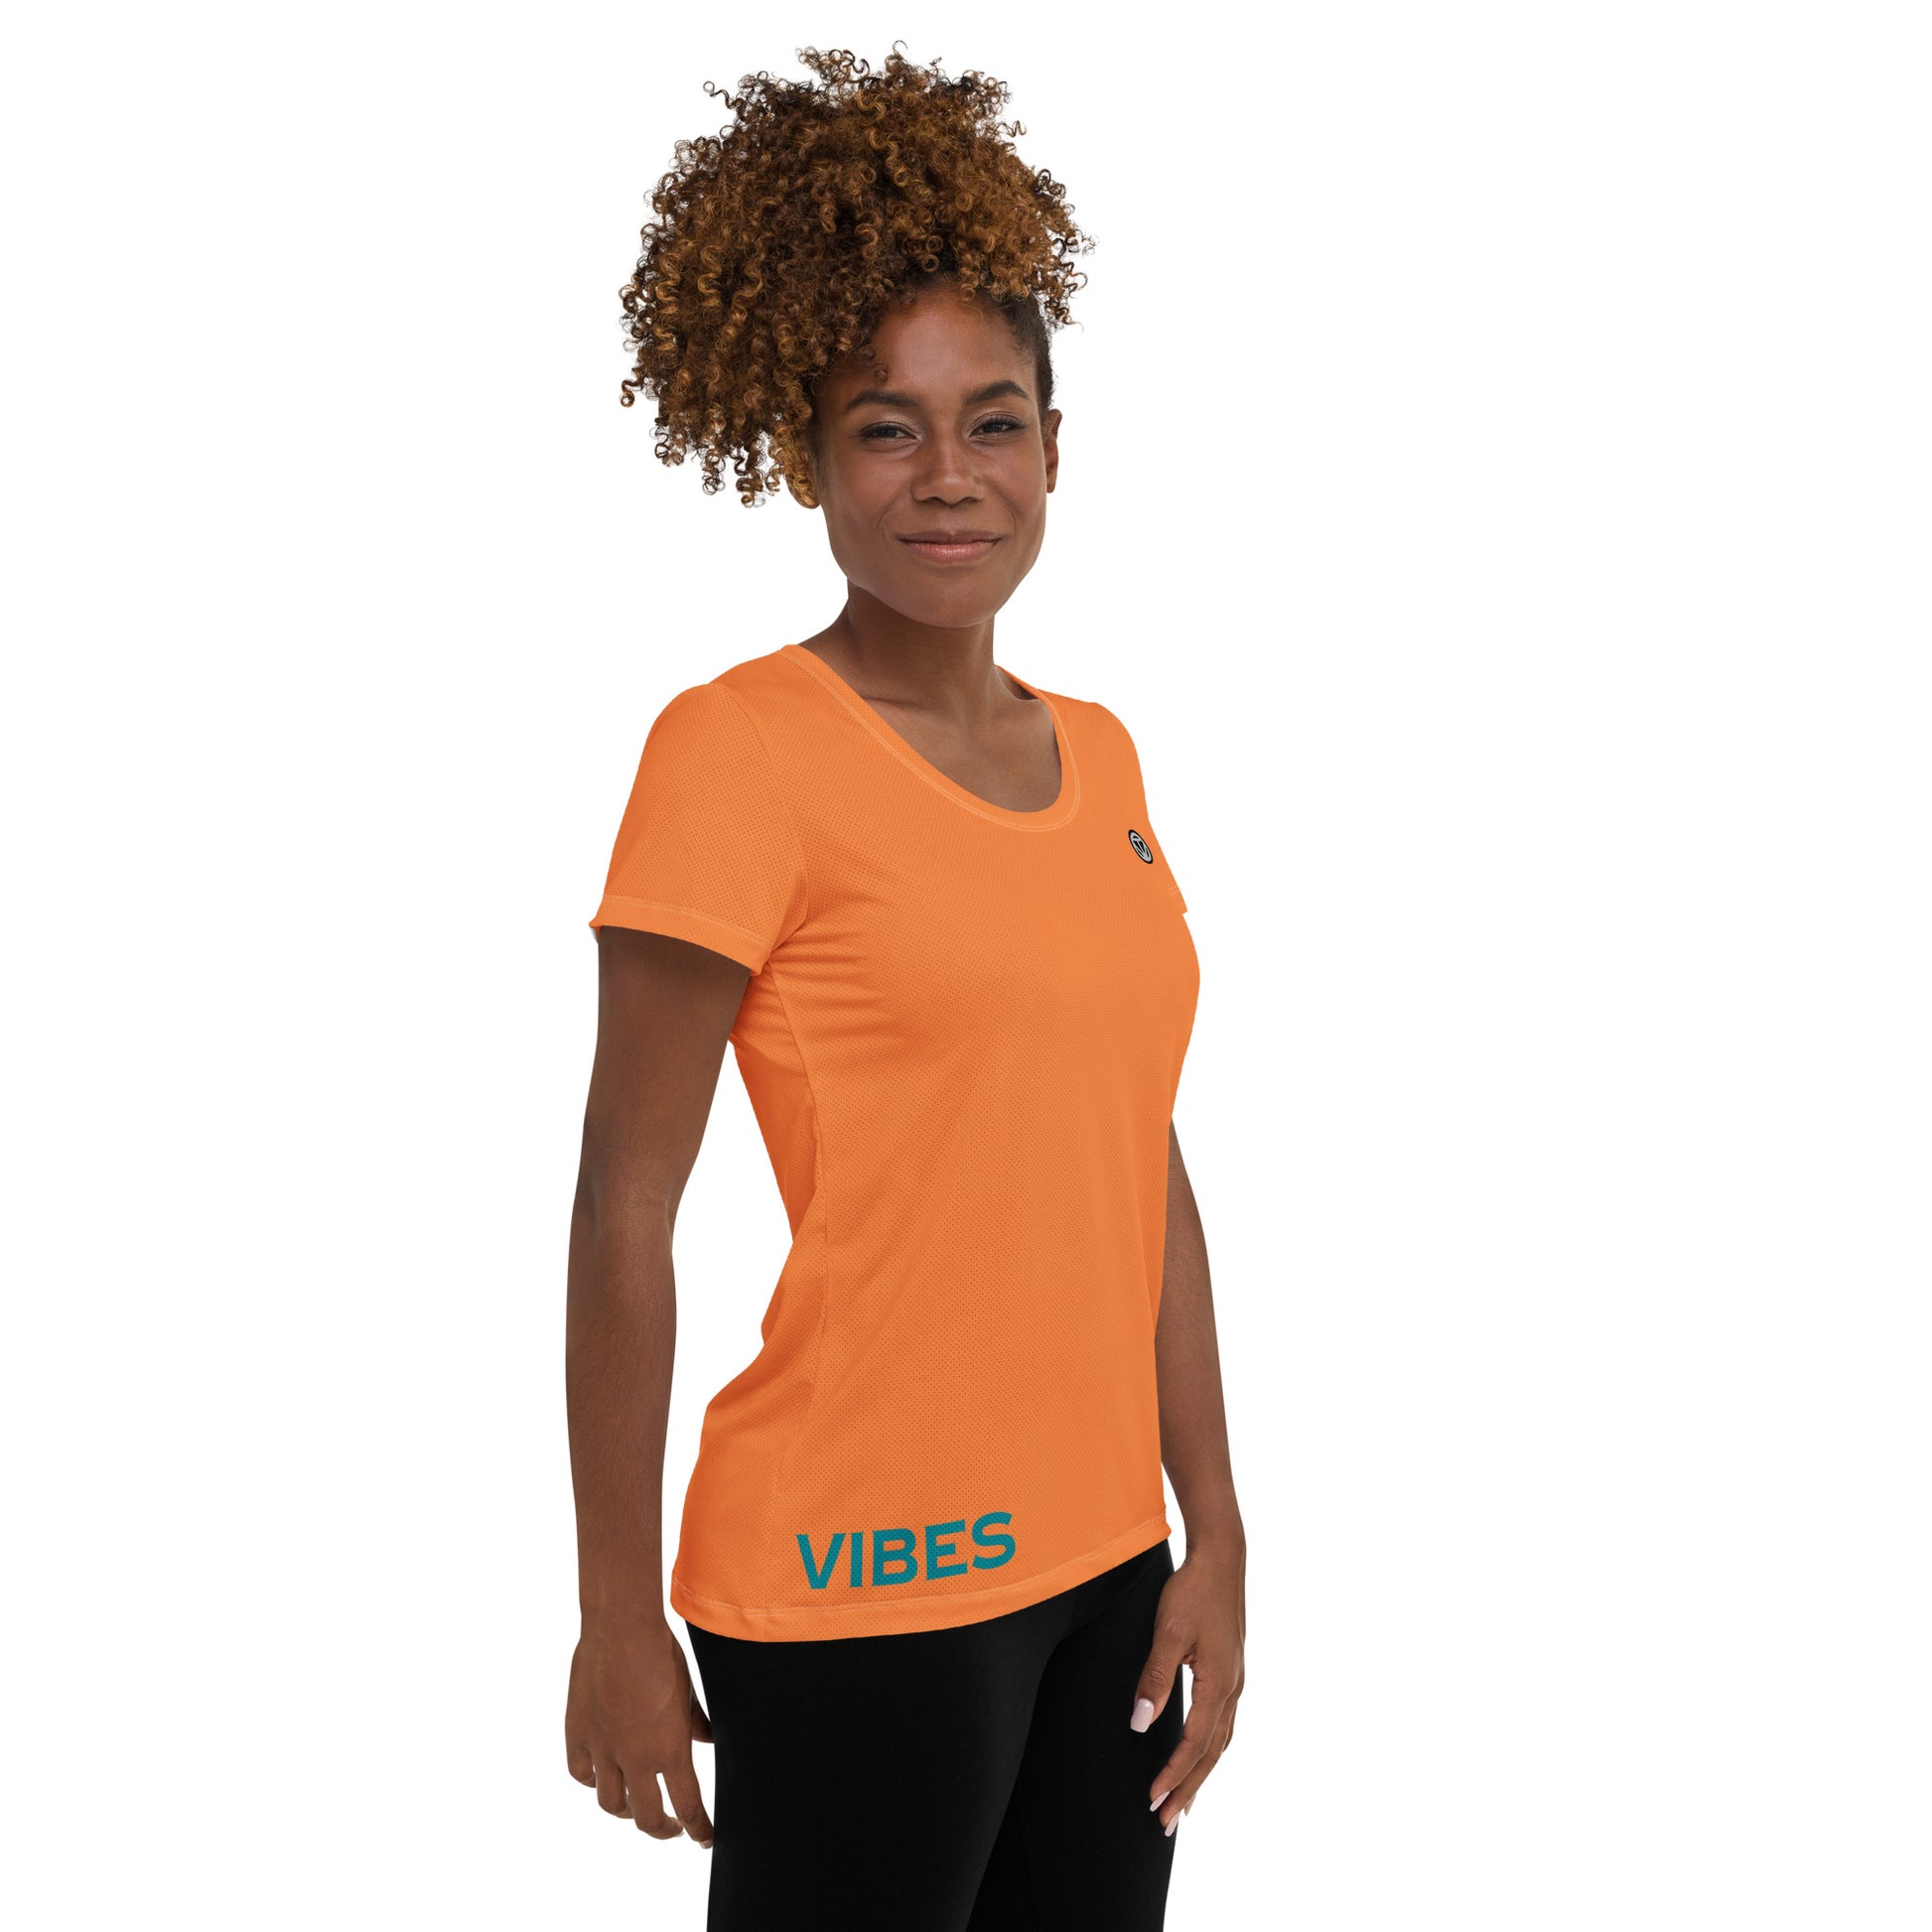 TIME OF VIBES - Women's Athletic T-shirt VIBES (Orange) - €45.00